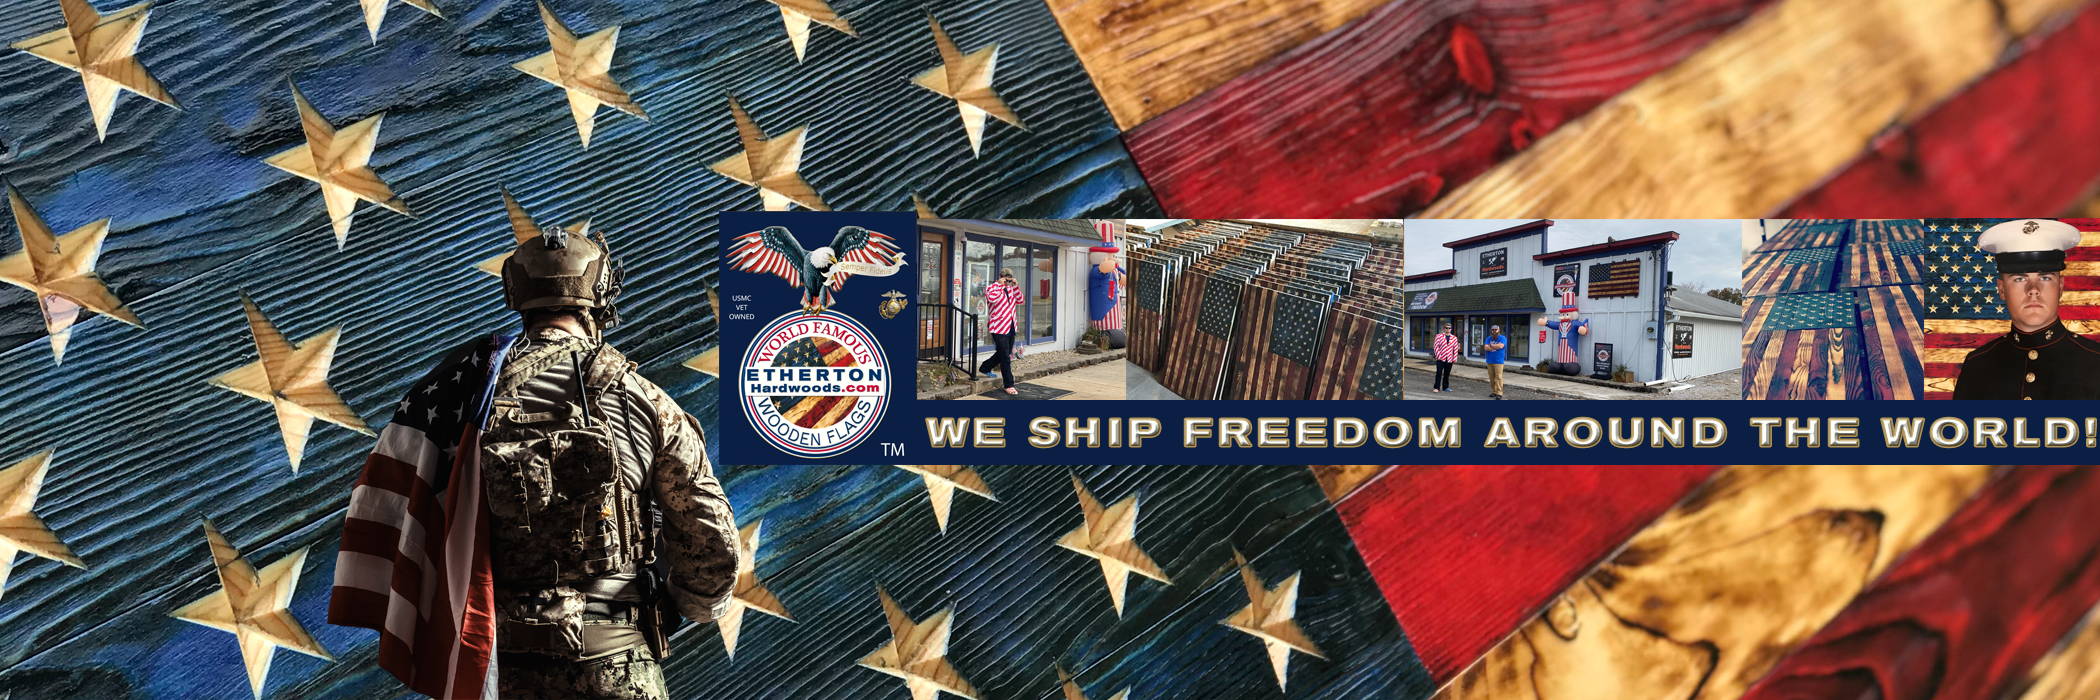 Etherton Hardwoods ships freedom around the world one wooden American Flag at a time.